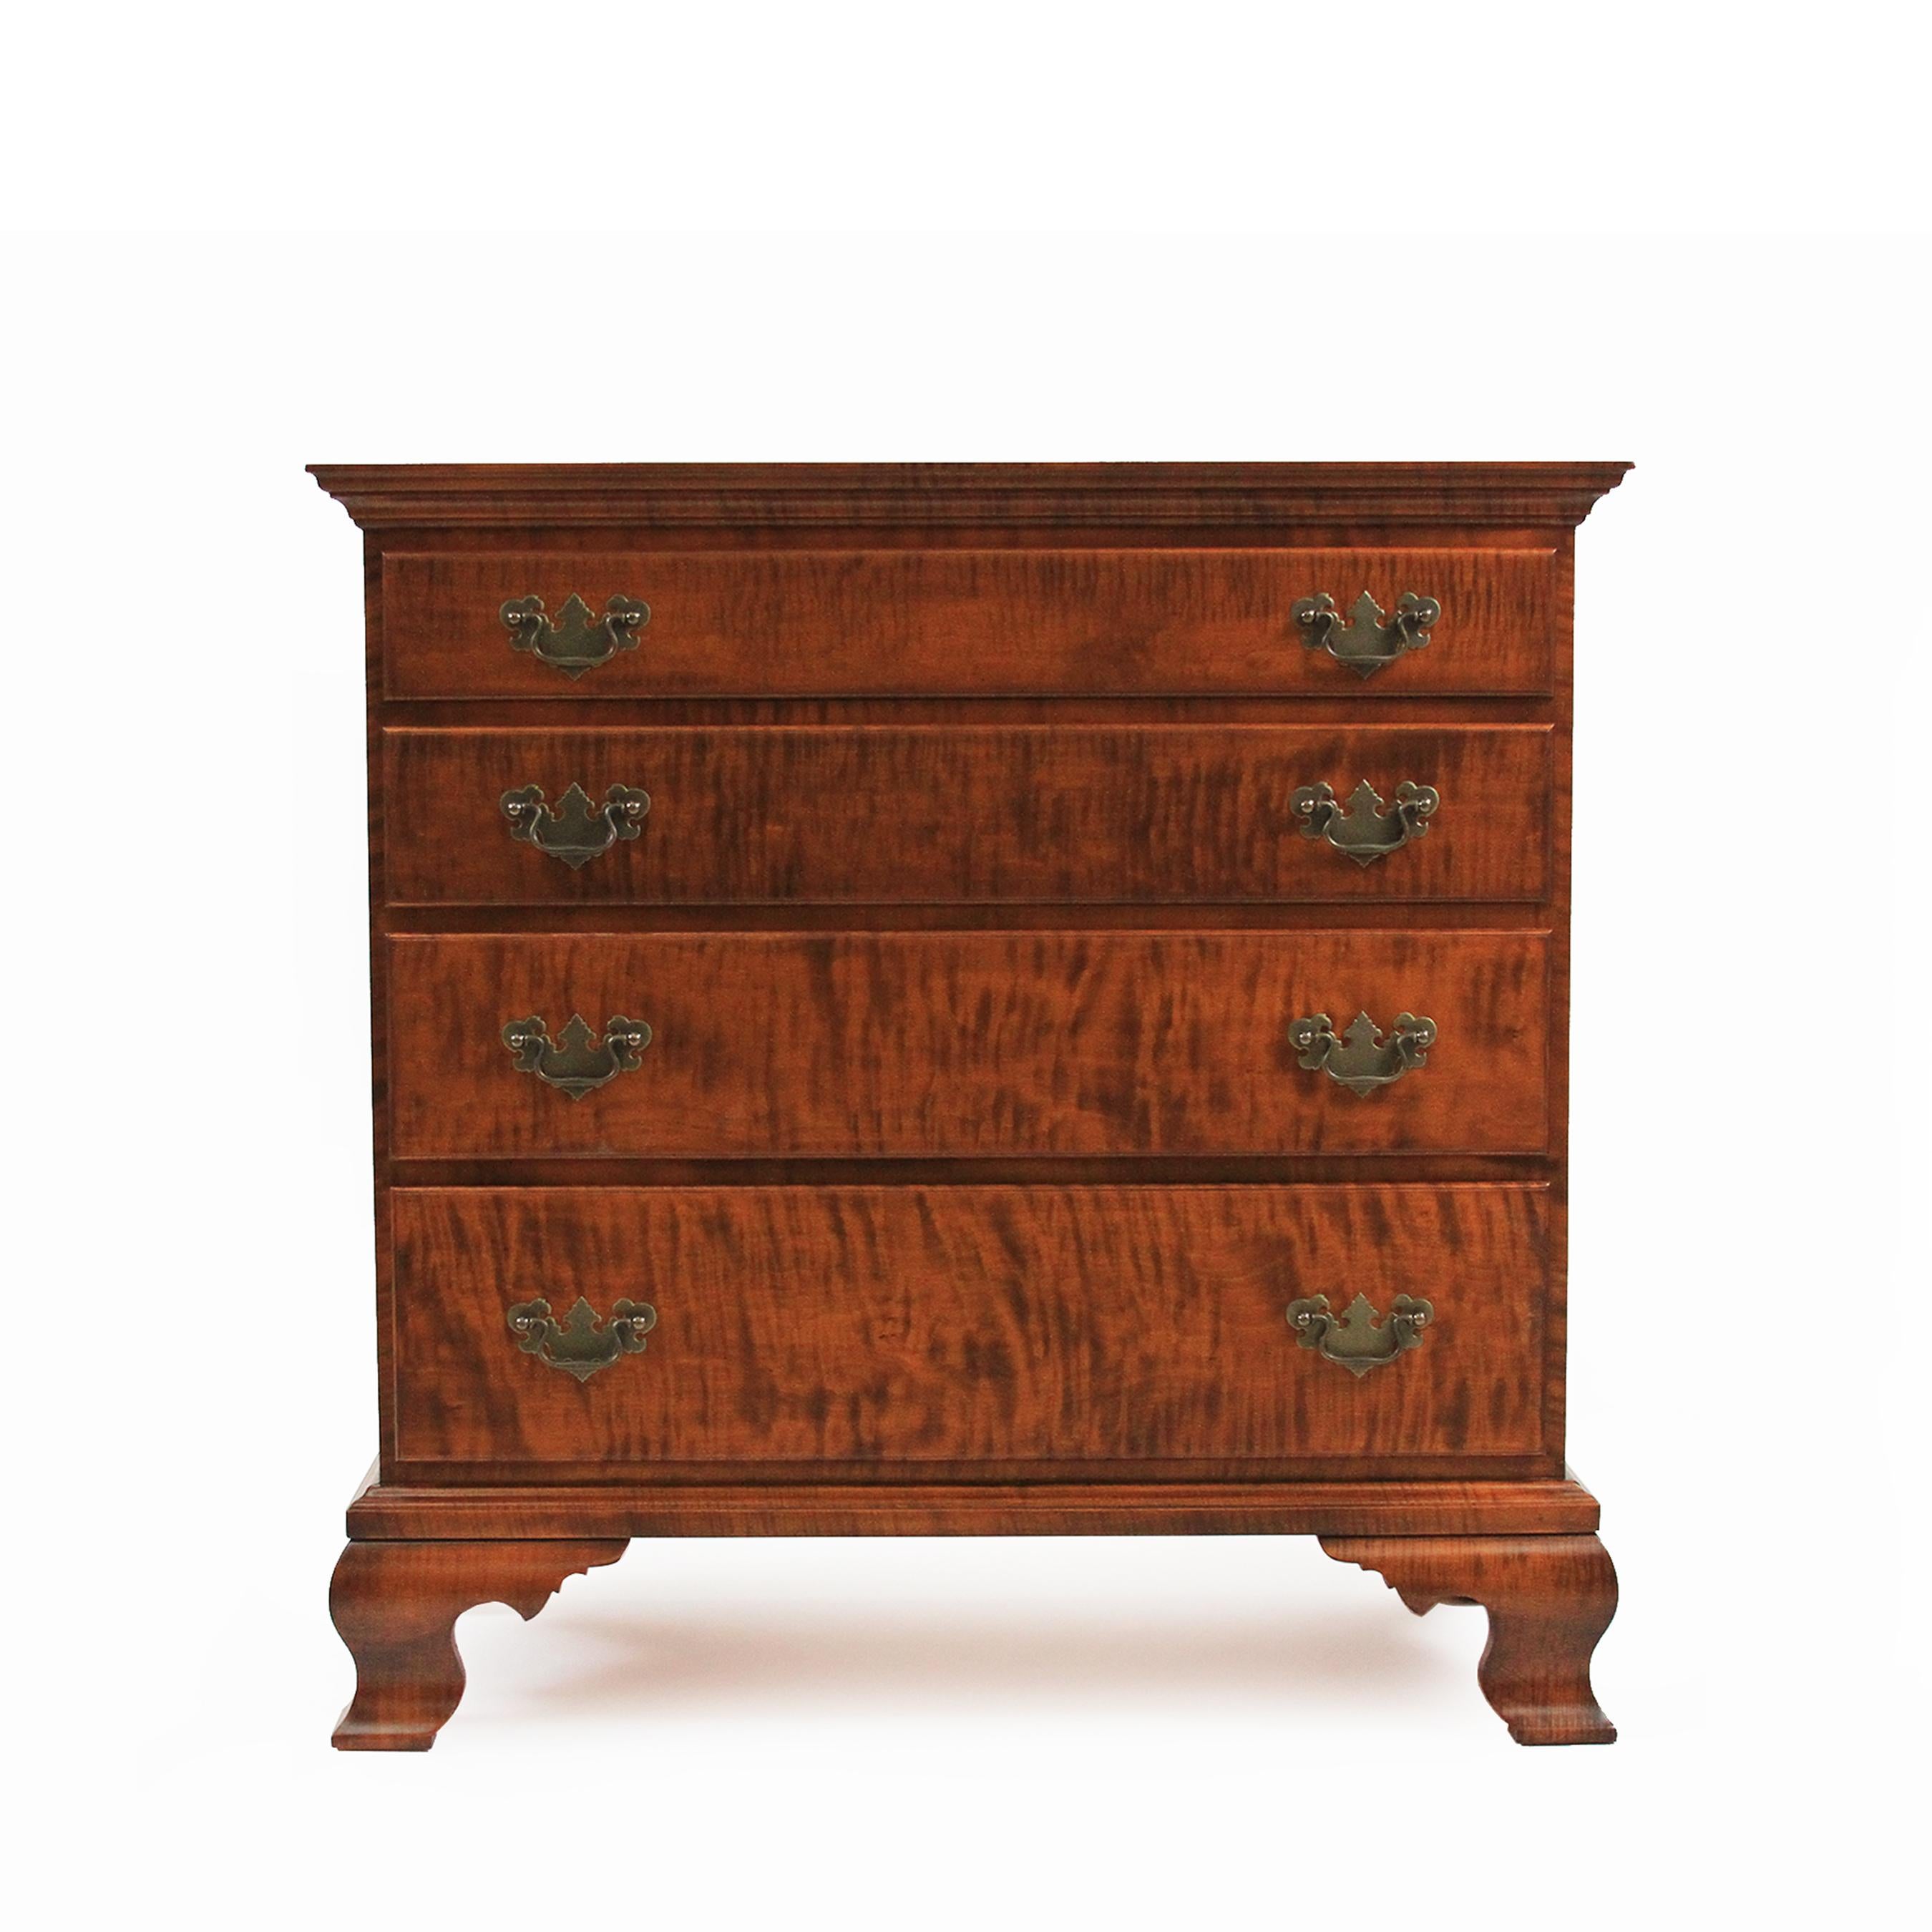 Our Chippendale tiger maple four-drawer dresser is shown in our amber tiger stain with dovetailed drawer cases, OG bracket feet and Chippendale brass pulls available polished or antiqued with matching escutcheons. Custom sizes, wood types and